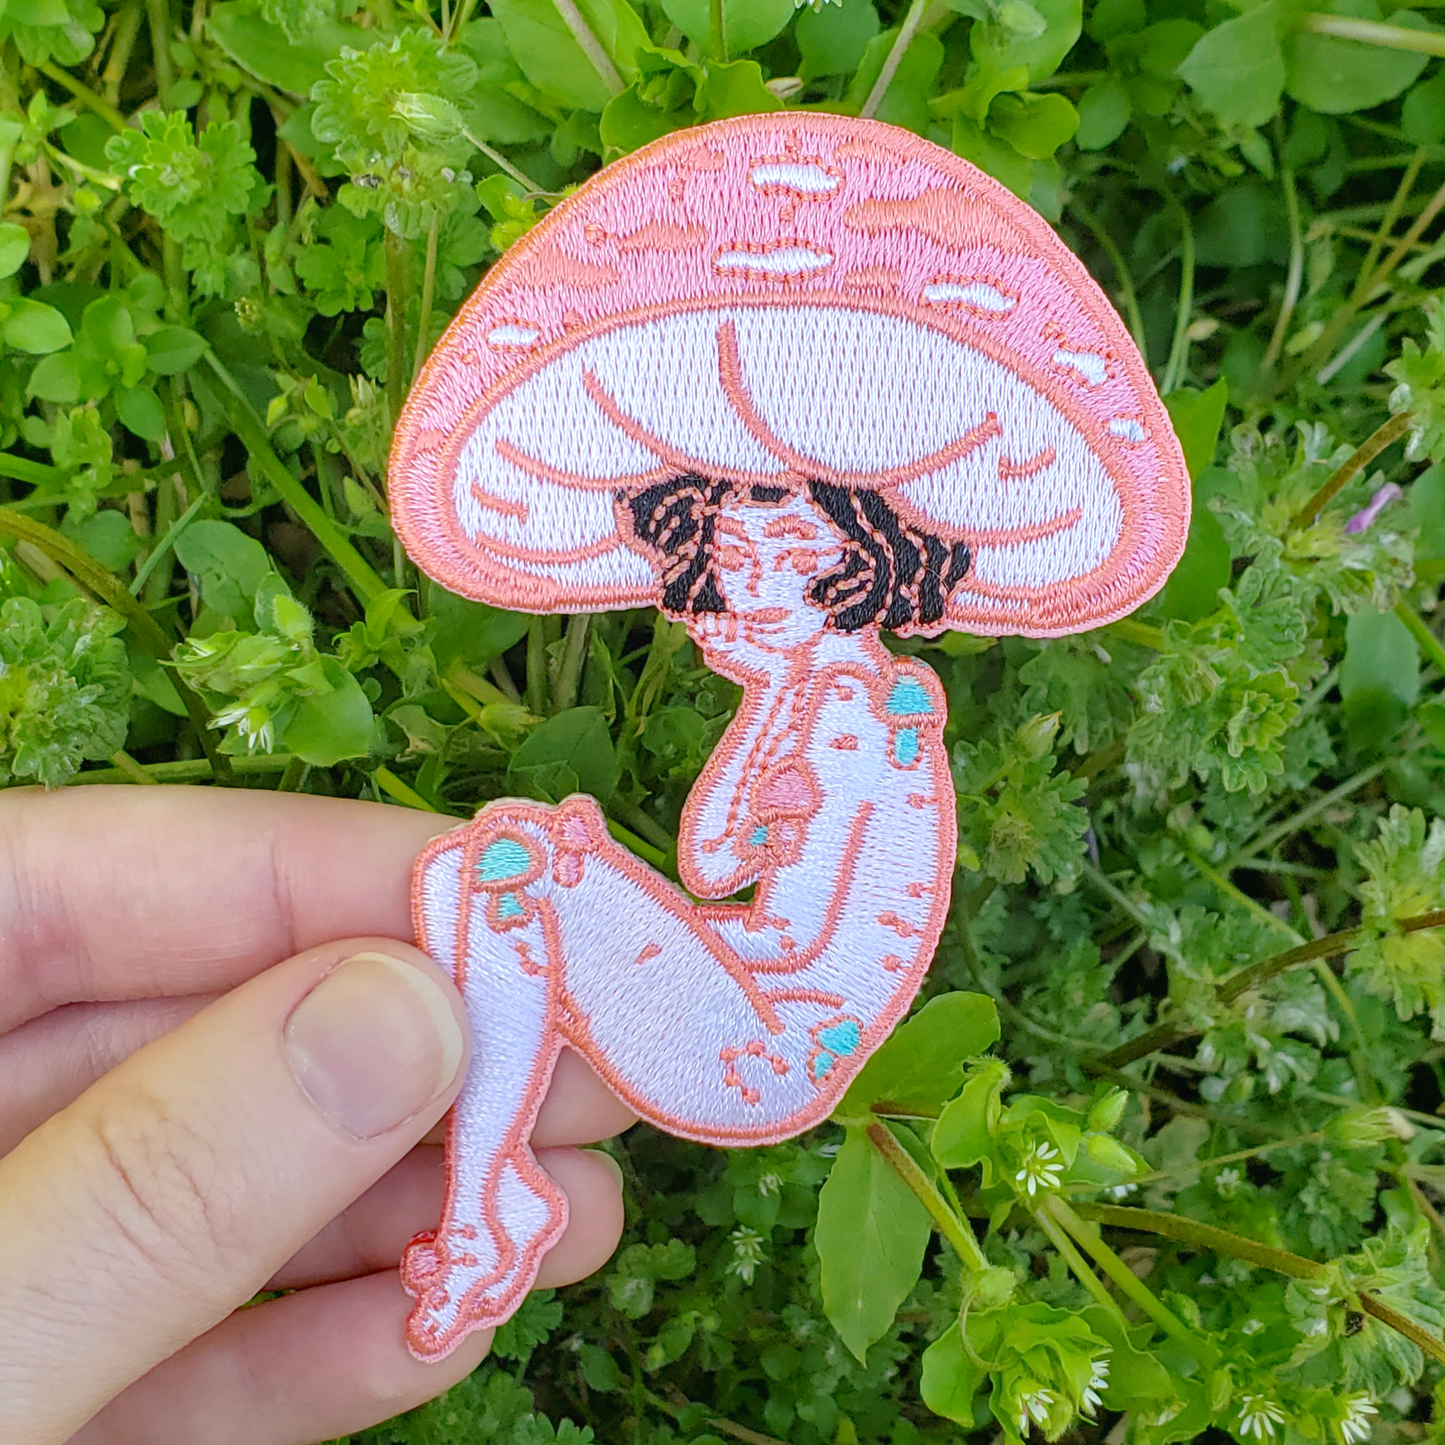 Cotton Candy Mushroom Girl Iron on Patch